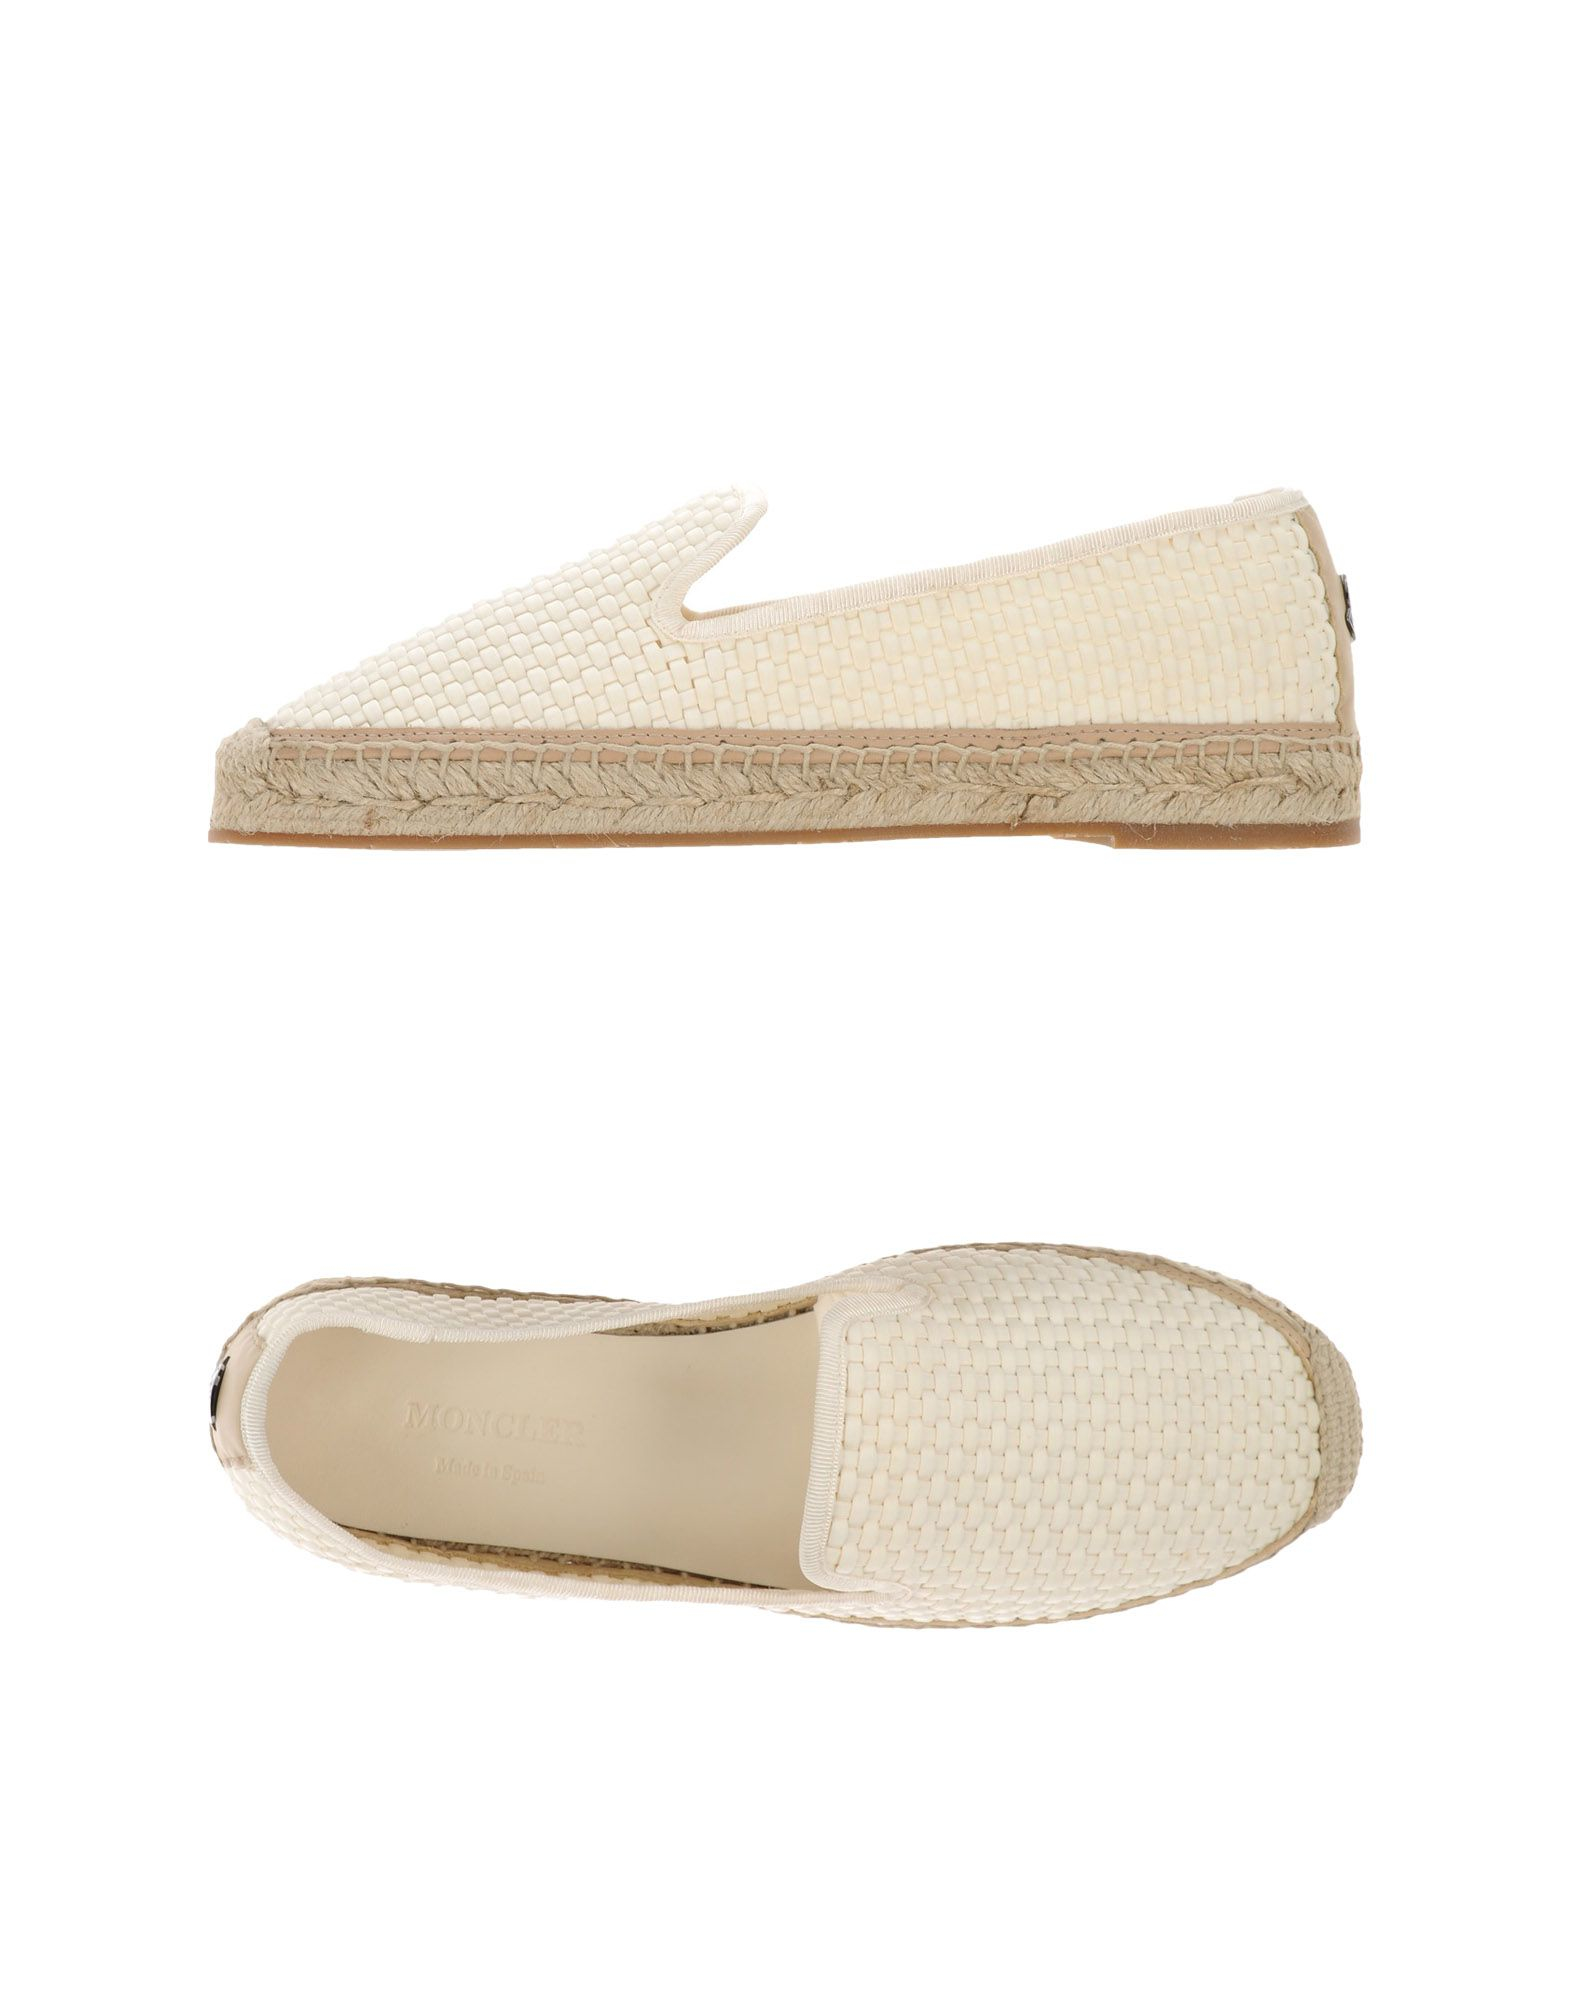 Moncler Leather Espadrilles in Ivory 